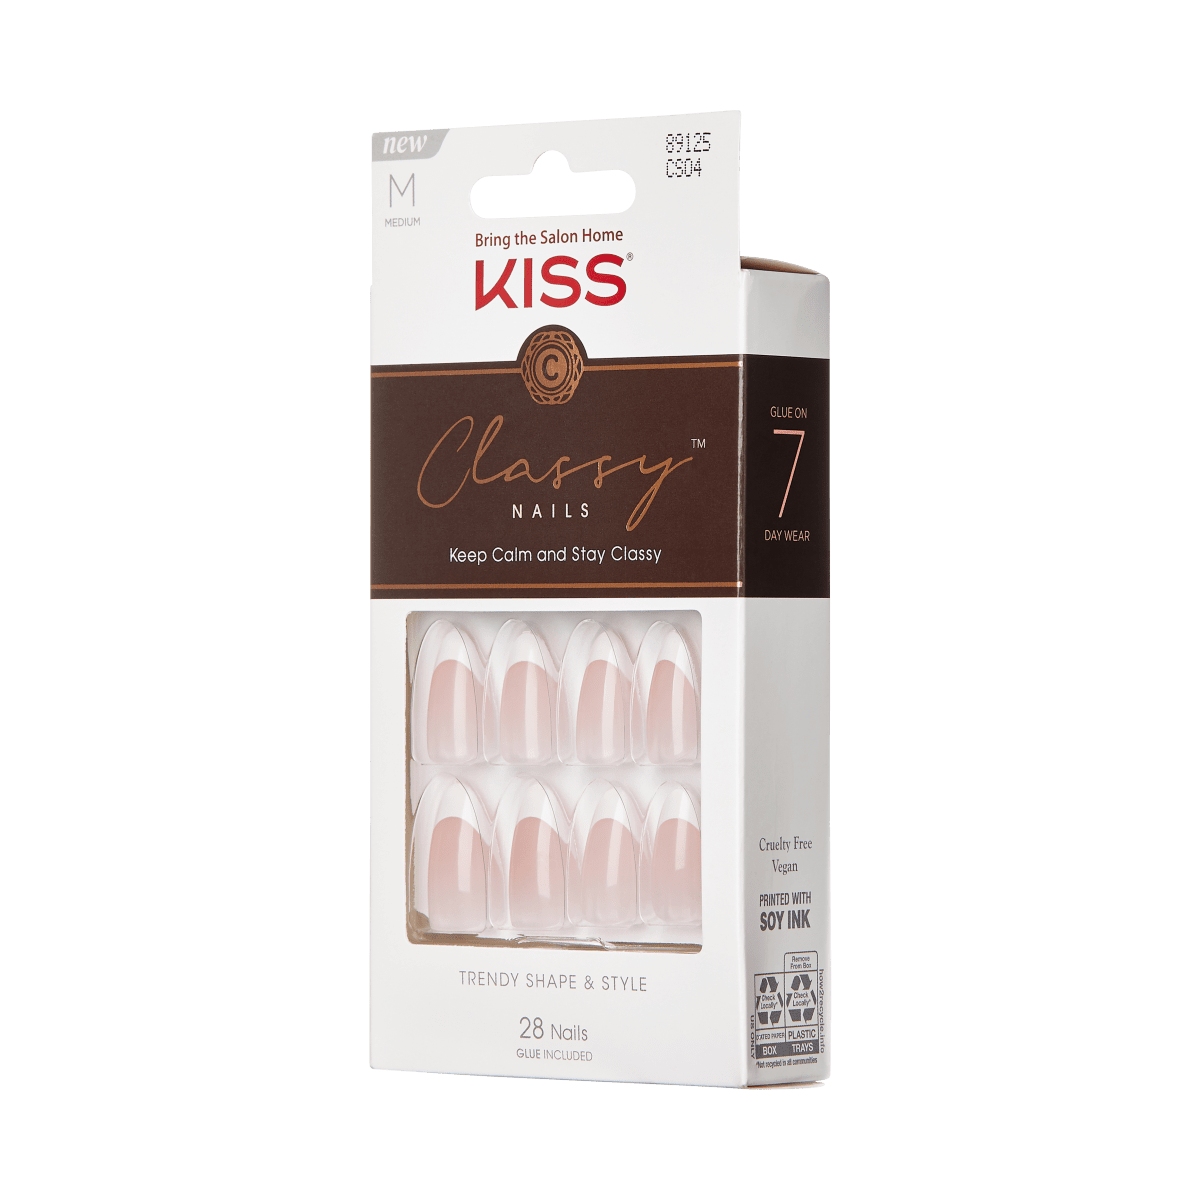 KISS Classy Nails, Press-On Nails, Dashing, White, Med Almond, 28ct